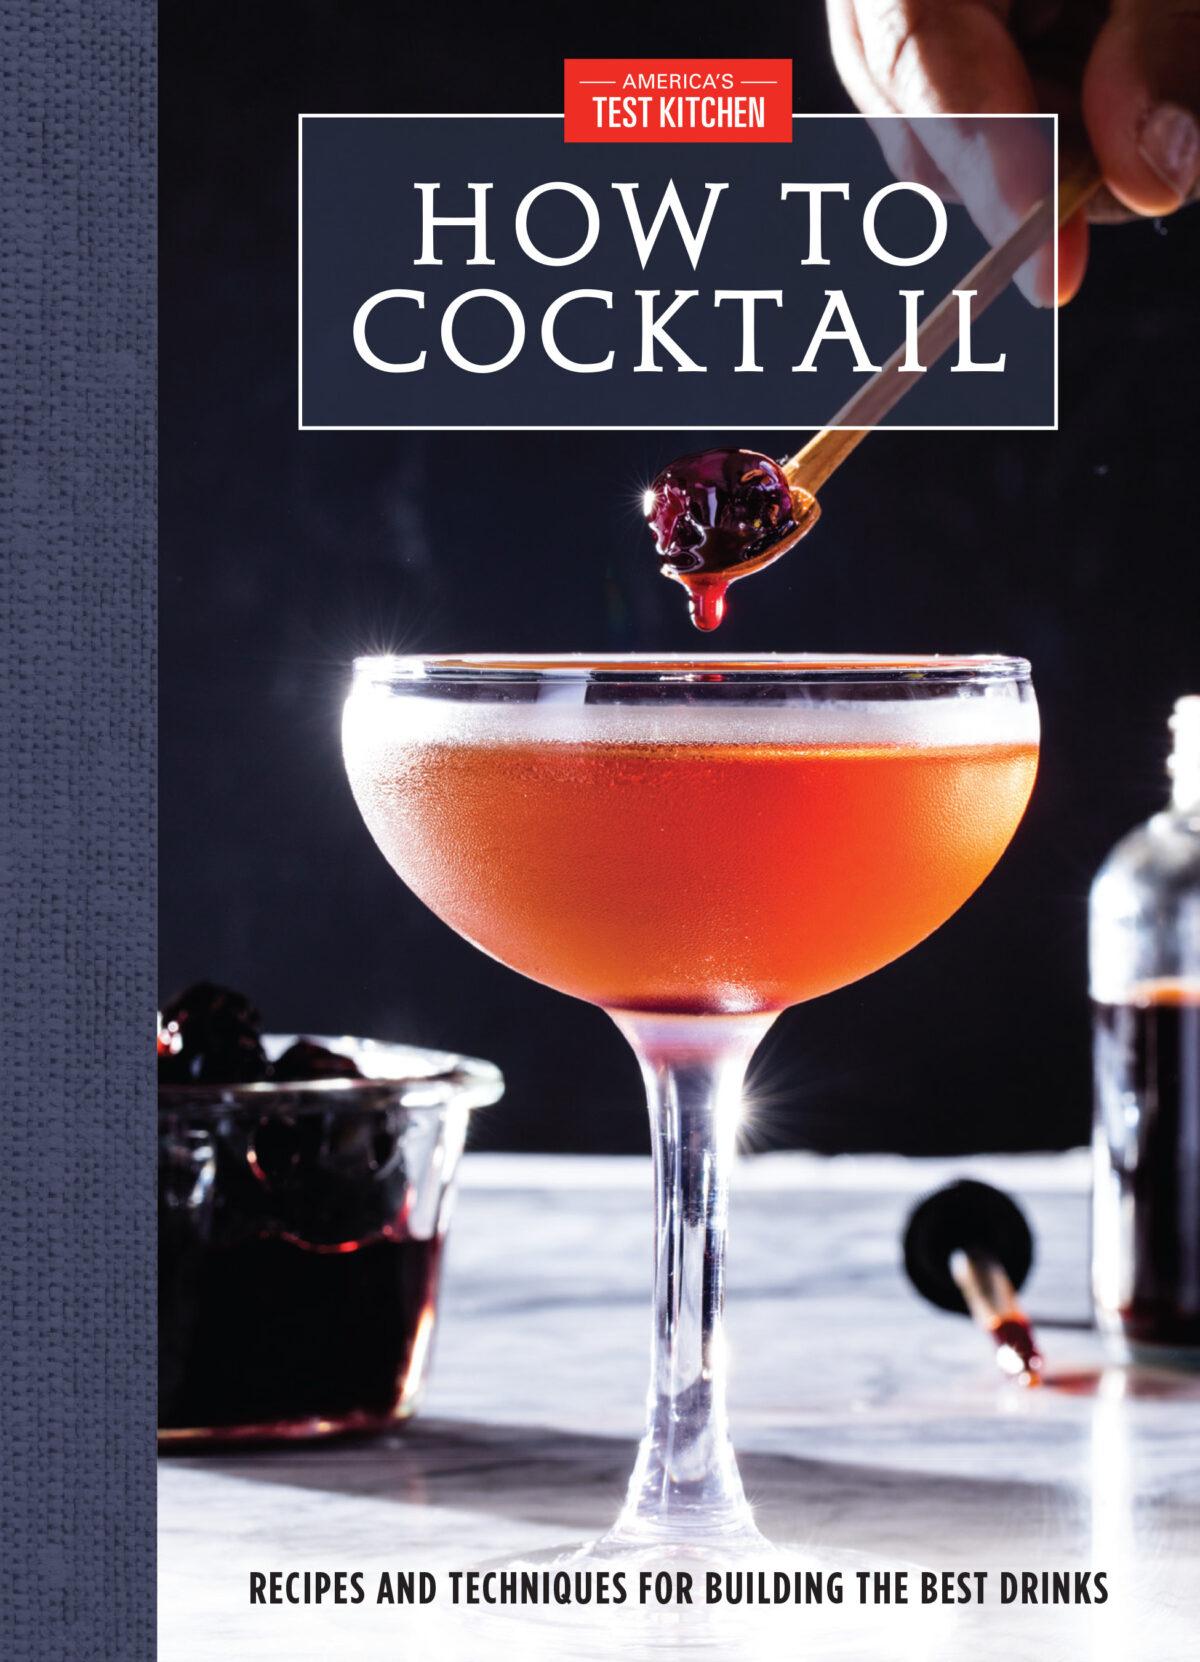 'How to Cocktail: Recipes and Techniques for Building the Best Drinks' by America's Test Kitchen (America's Test Kitchen, $24.99).